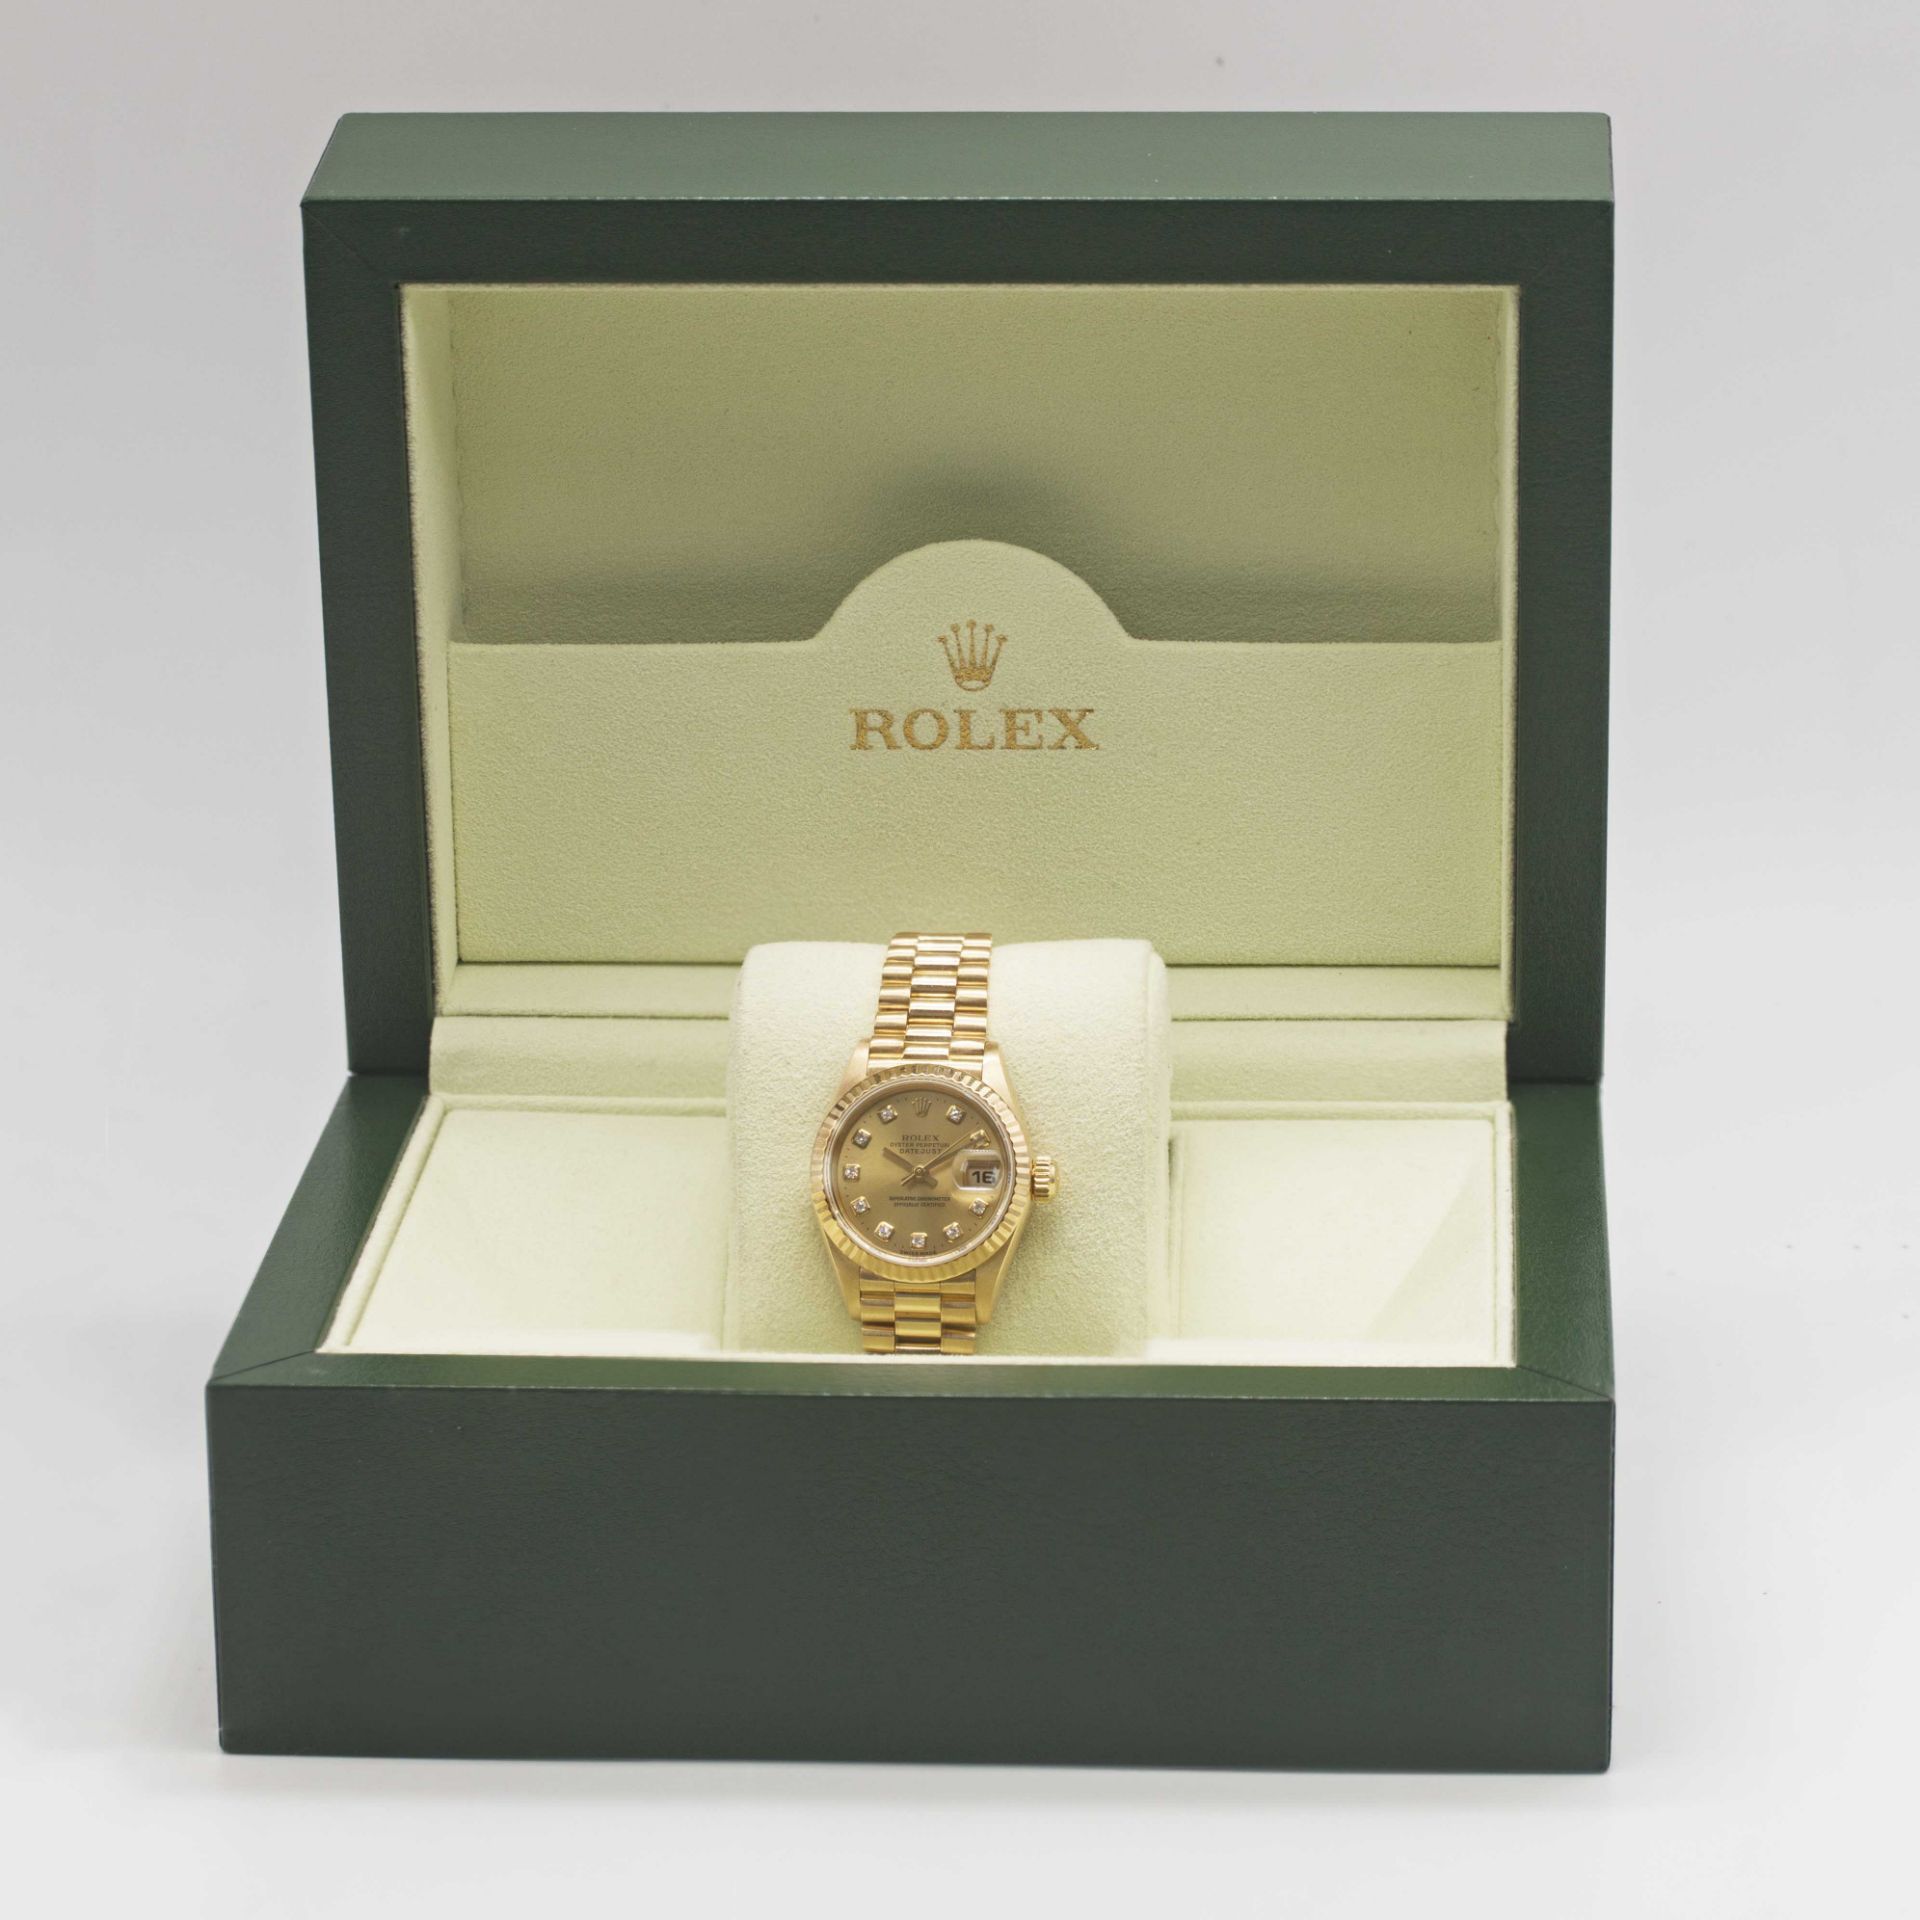 A LADIES 18K SOLID GOLD ROLEX OYSTER PERPETUAL DATEJUST BRACELET WATCH CIRCA 1996, REF. 69178 WITH - Image 12 of 12